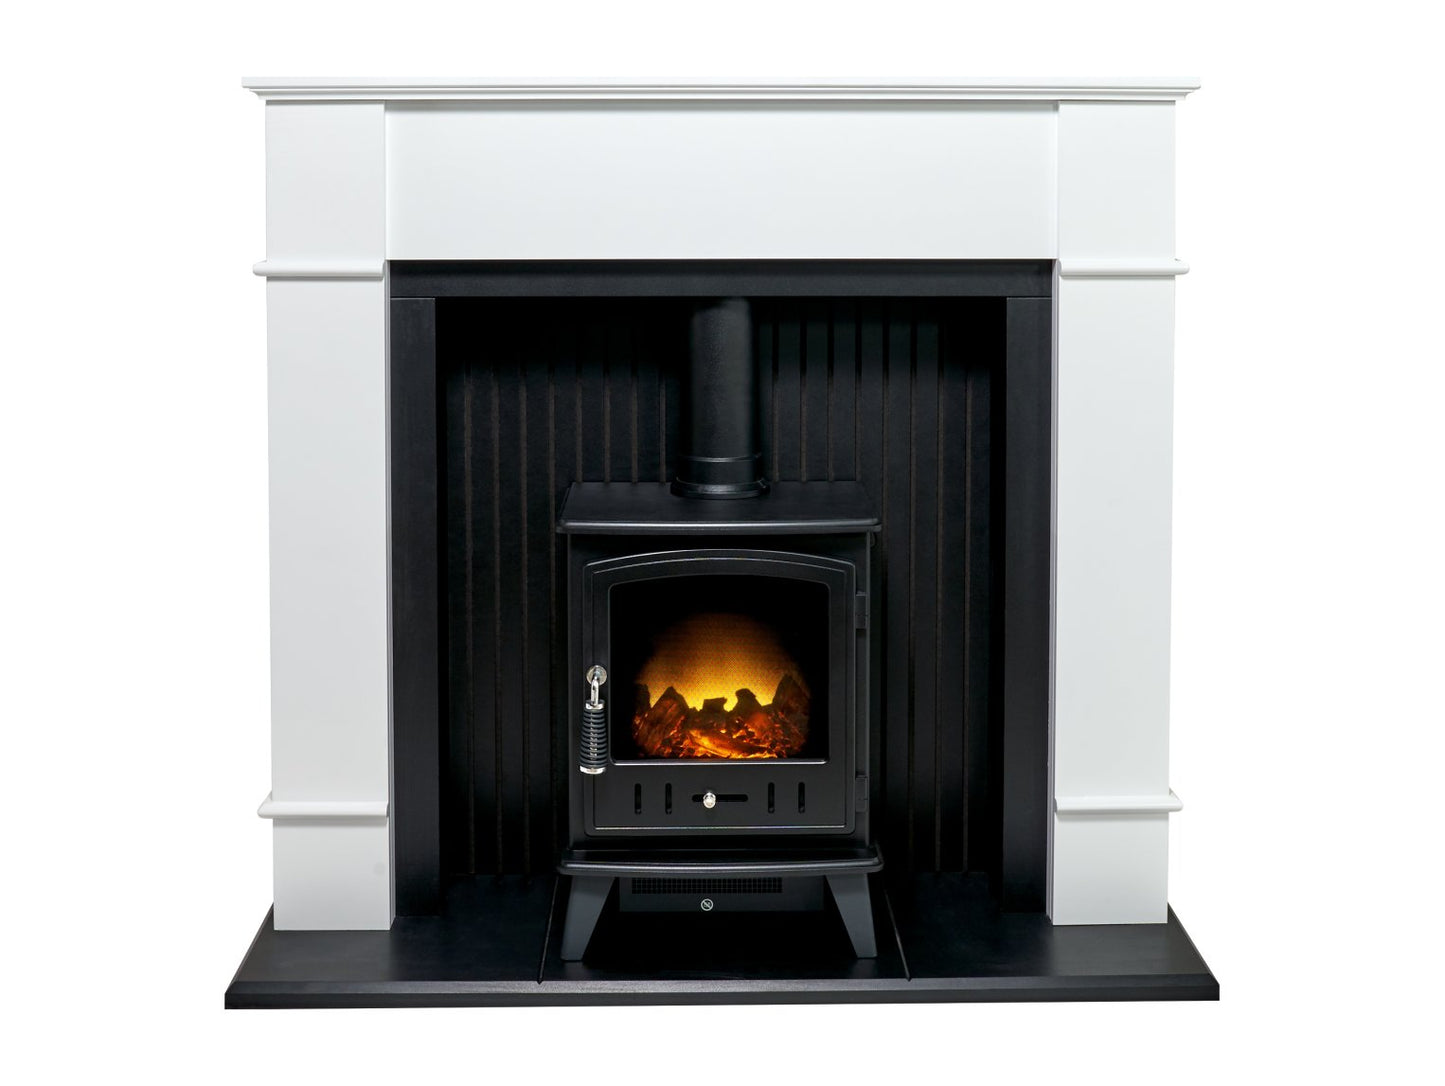 Adam Oxford Stove Suite in Pure White with Aviemore Electric Stove in Black, 48 Inch